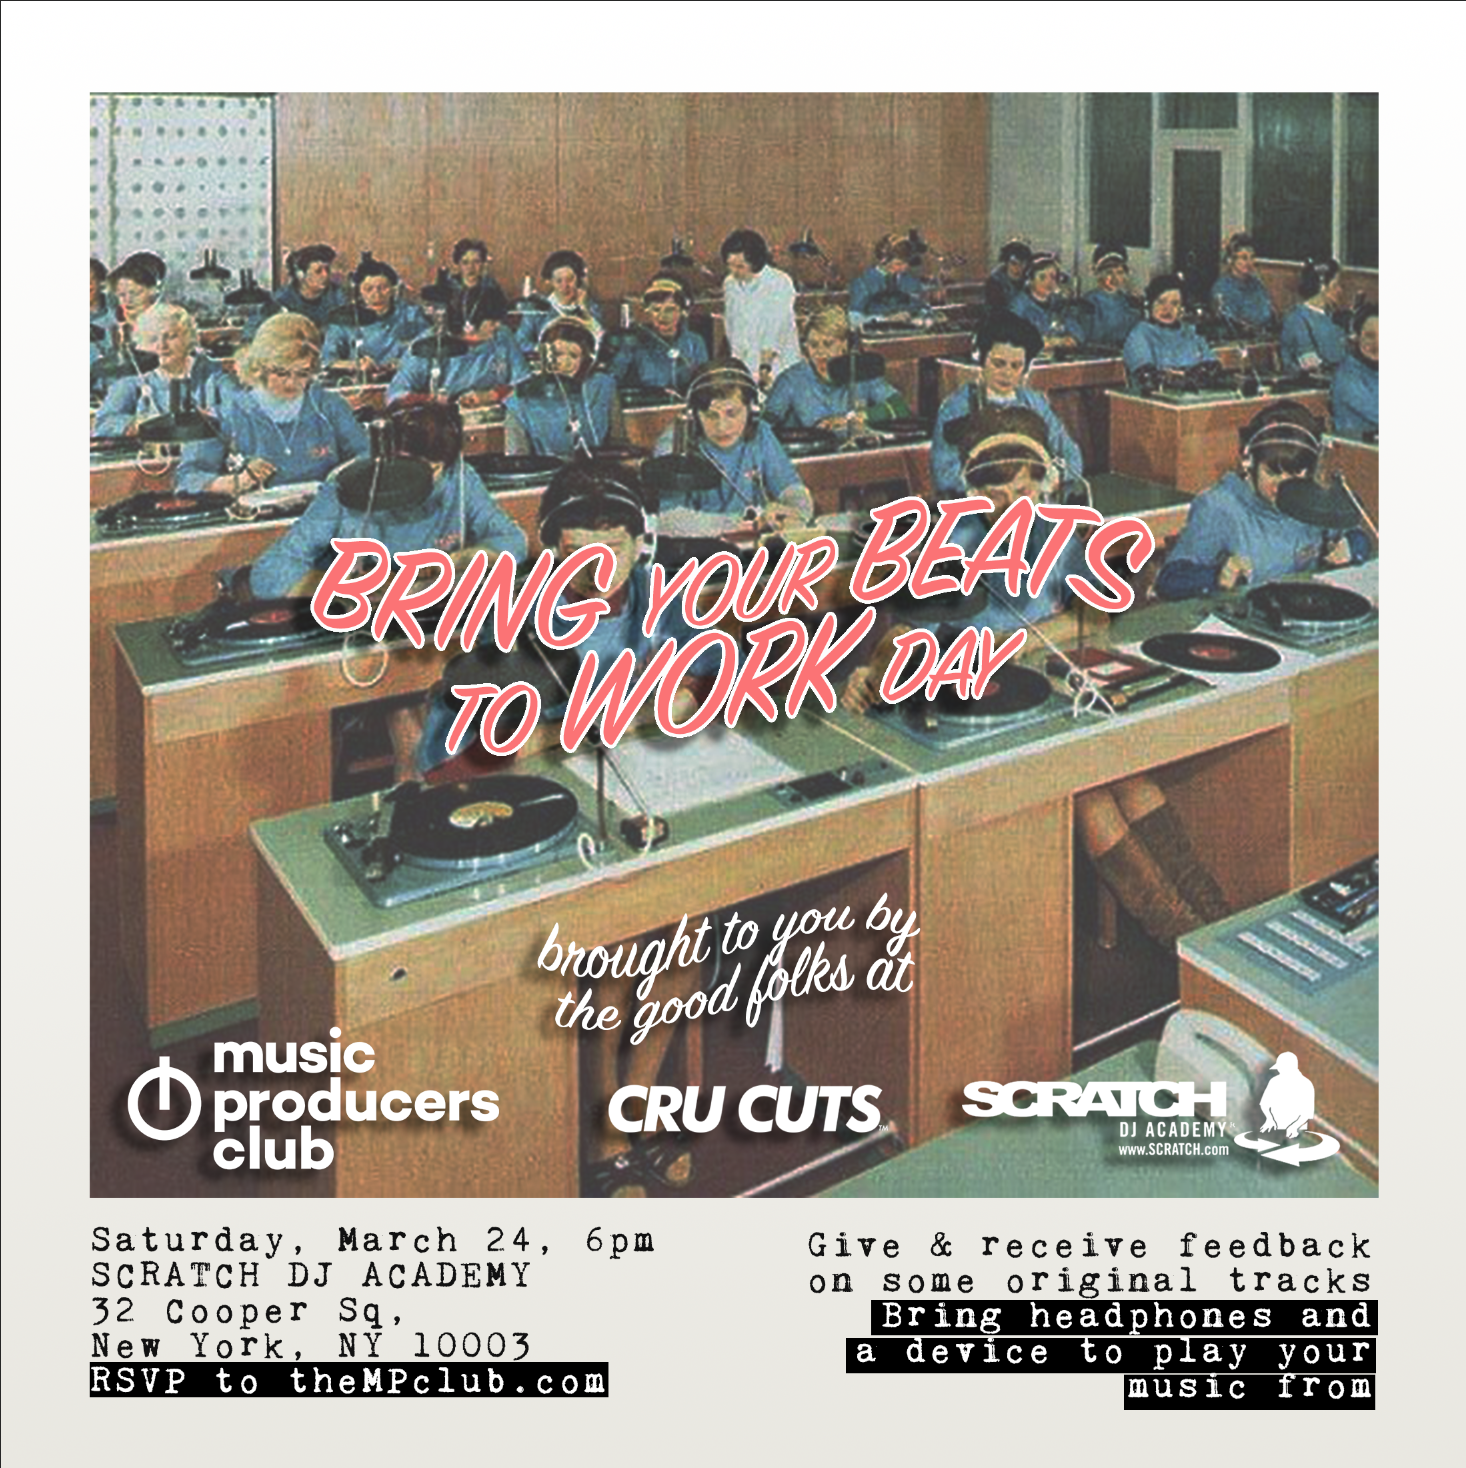 NYC Event Alert: Music Producers Club ‘Bring Your Beats to Work Day’ – Sat. 3/24